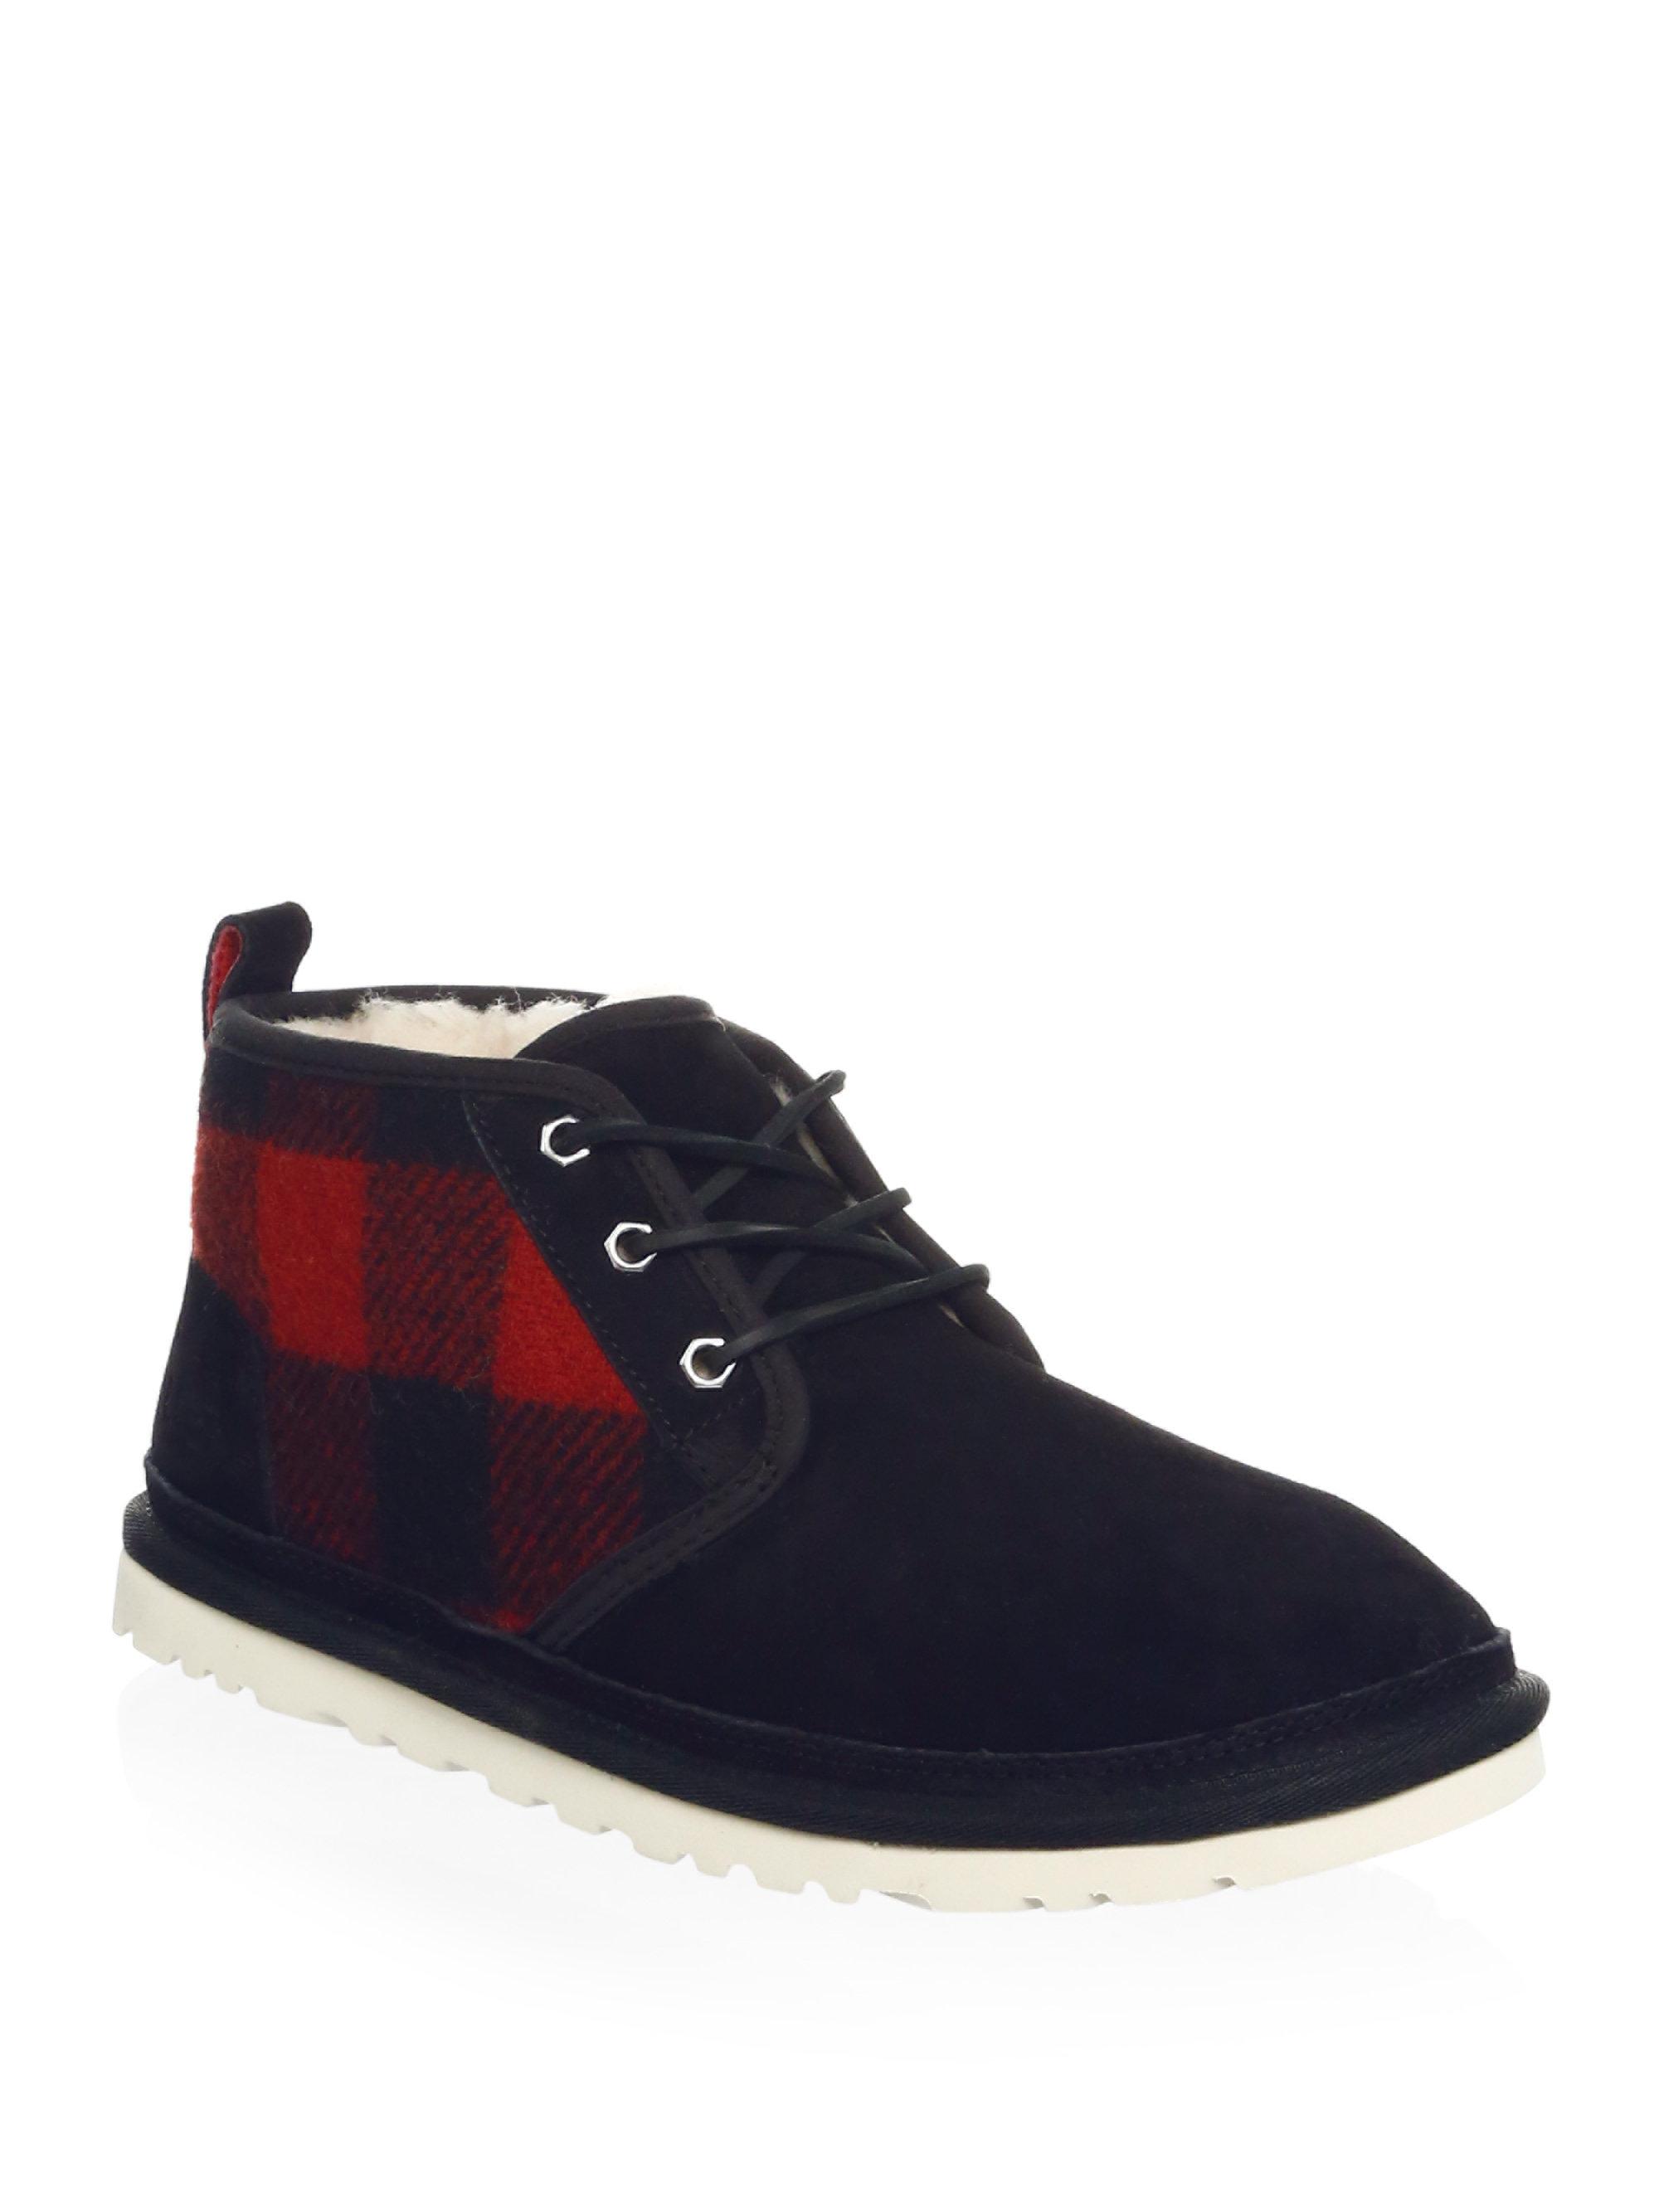 red plaid ugg boots